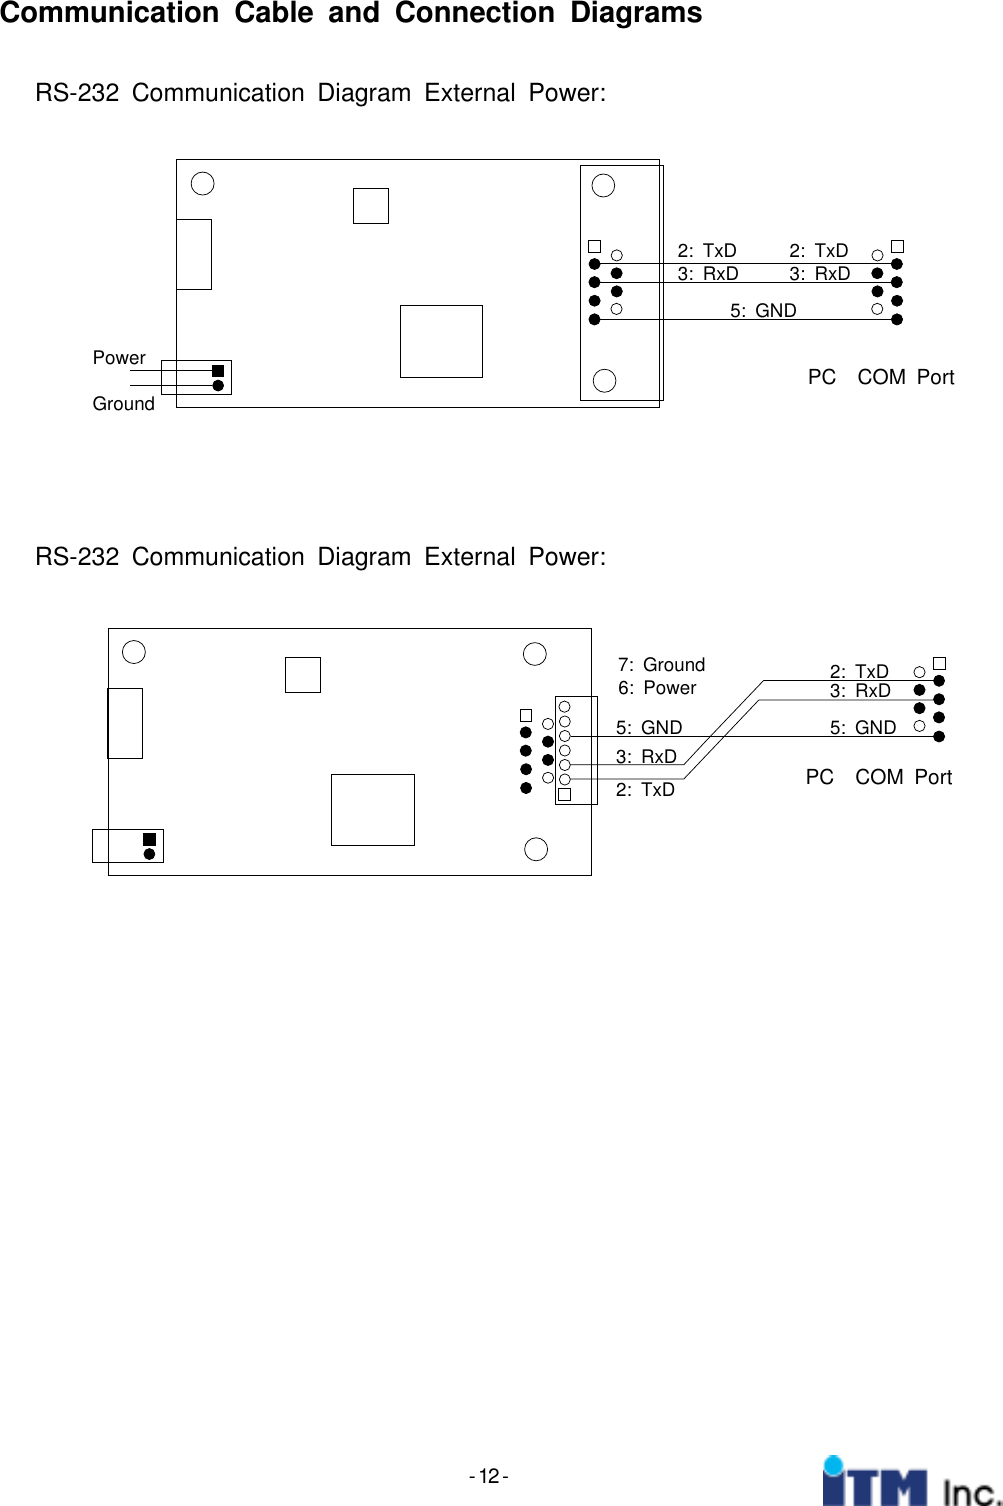 - 12 -Communication Cable and Connection DiagramsRS-232 Communication Diagram External Power:PowerGround2: TxD3: RxD5: GND3: RxD2: TxDPC COM PortRS-232 Communication Diagram External Power:PC COM Port2: TxD3: RxD3: RxD2: TxD5: GND 5: GND6: Power7: Ground